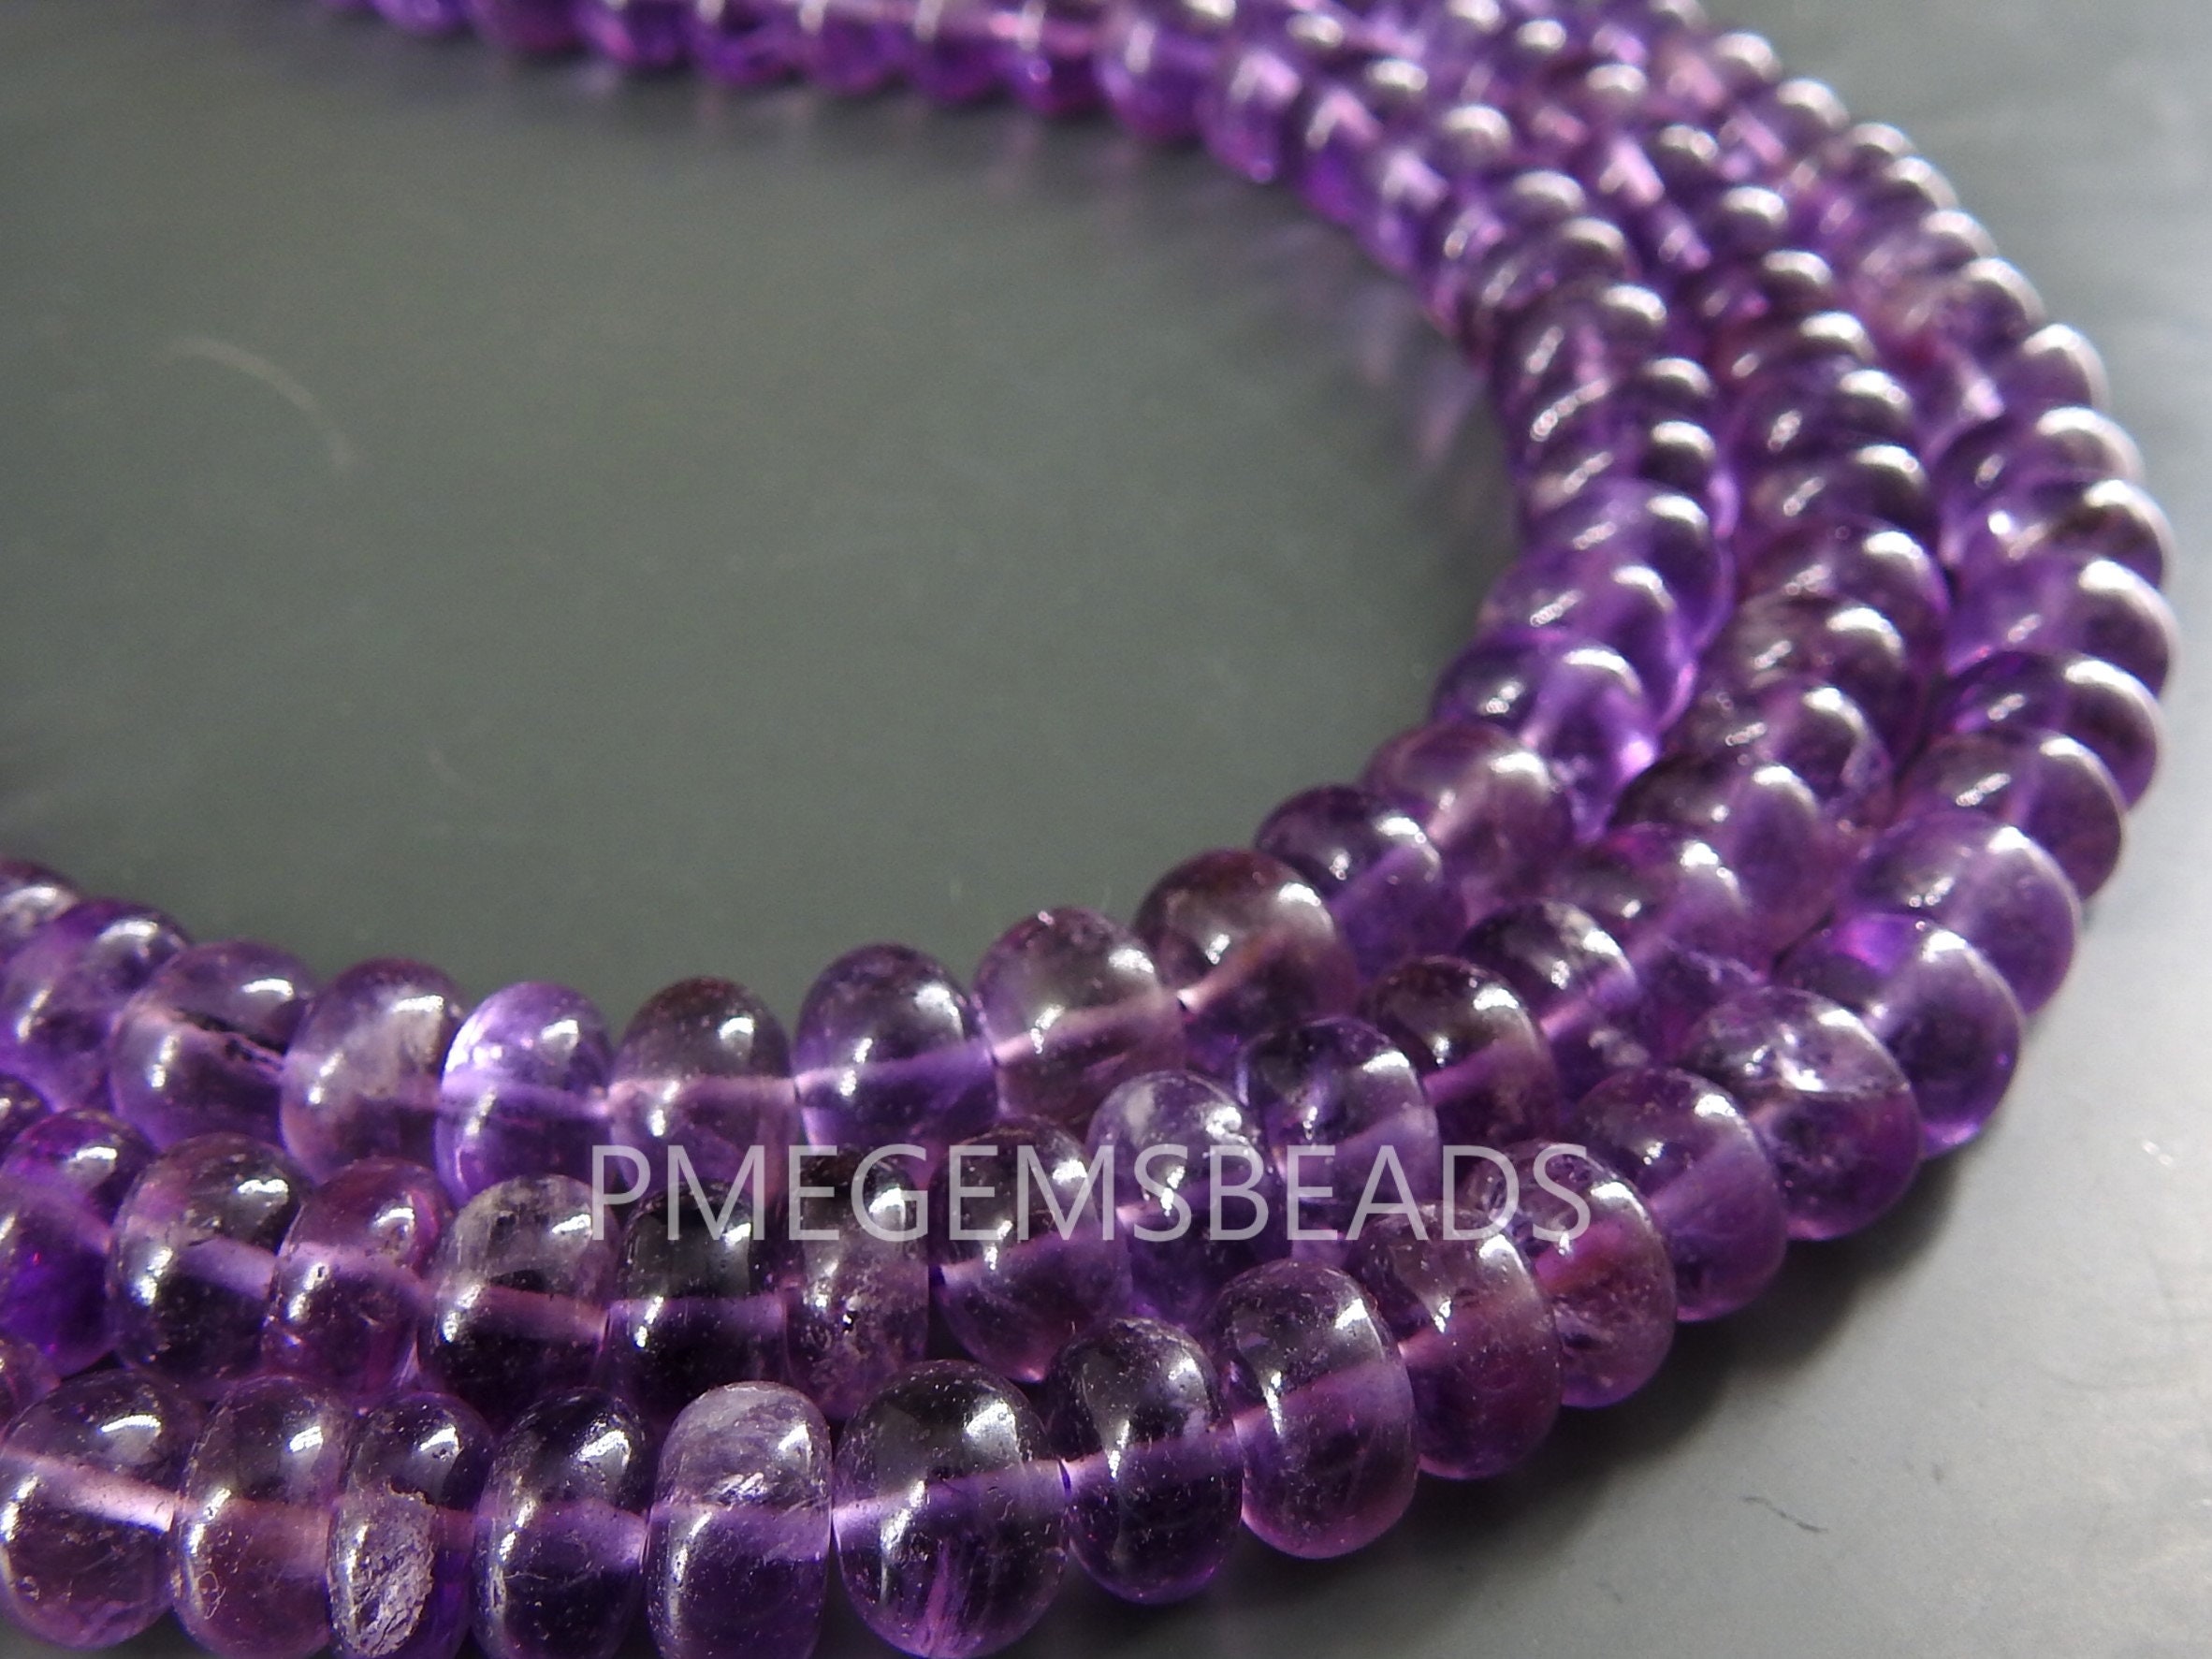 Amethyst Smooth Roundel Beads,Handmade,Loose Stone,For Making Jewelry,Necklace,12Inch Strand,Wholesaler,Supplies,100%Natural PME-B9 | Save 33% - Rajasthan Living 13